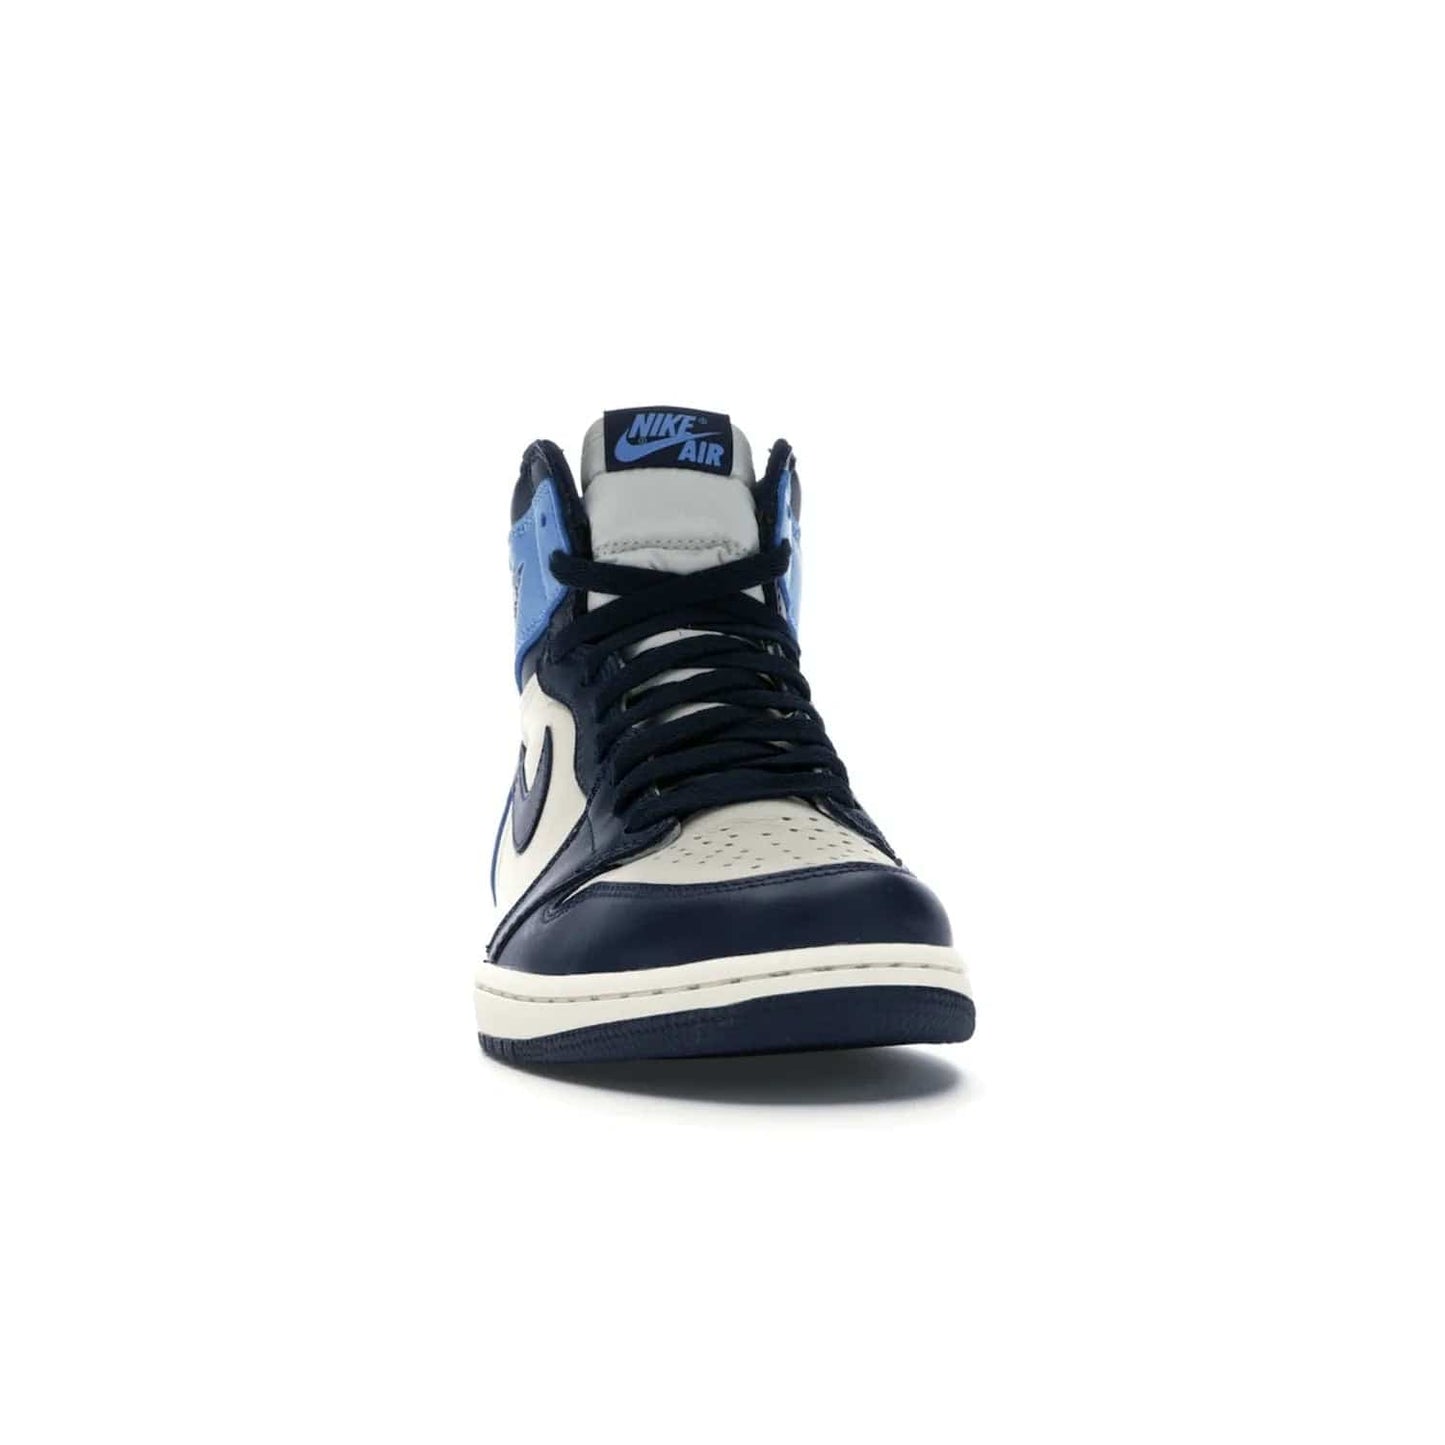 Jordan 1 Retro High Obsidian UNC - Image 9 - Only at www.BallersClubKickz.com - Bring a timeless classic to your wardrobe with the Air Jordan 1 Retro High "Obsidian/University Blue”. A full leather upper combines Obsidian and University Blue detailing for a retro Jordan style. Stitched Jumpman logo pays tribute to UNC. Experience classic style with a timeless sneaker.